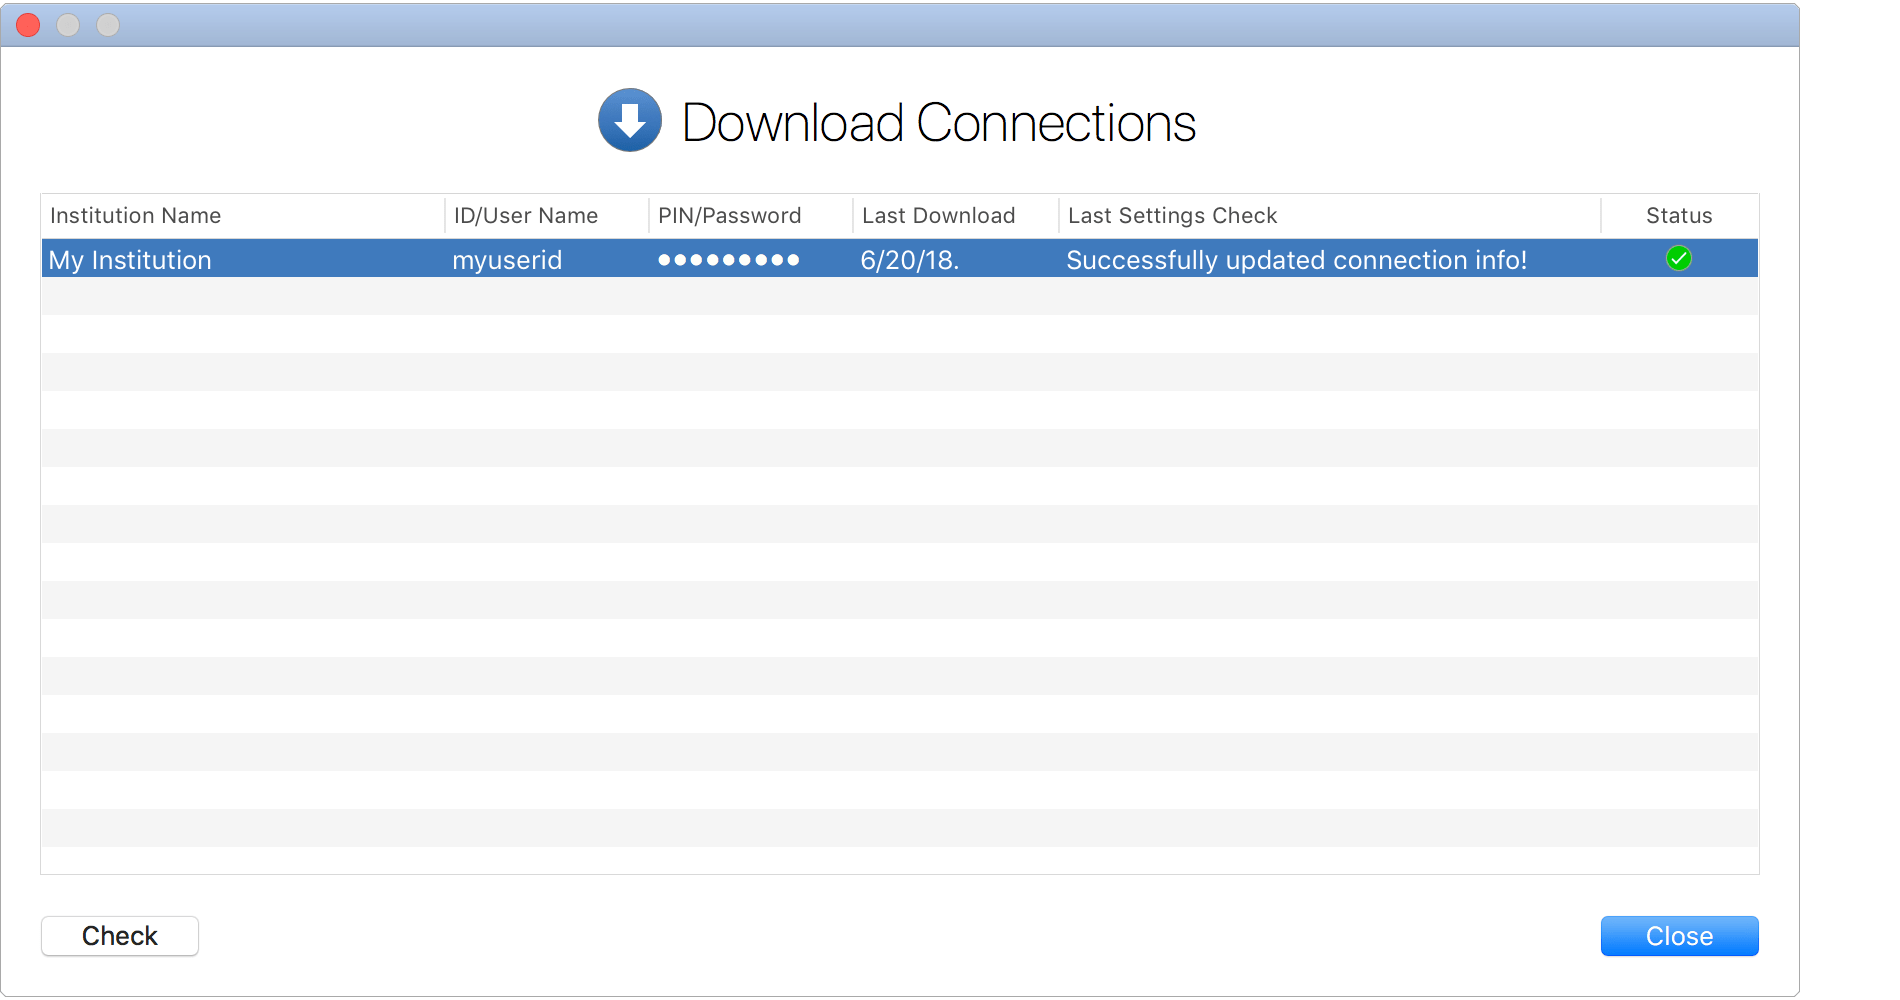 Check Download Connections - Success